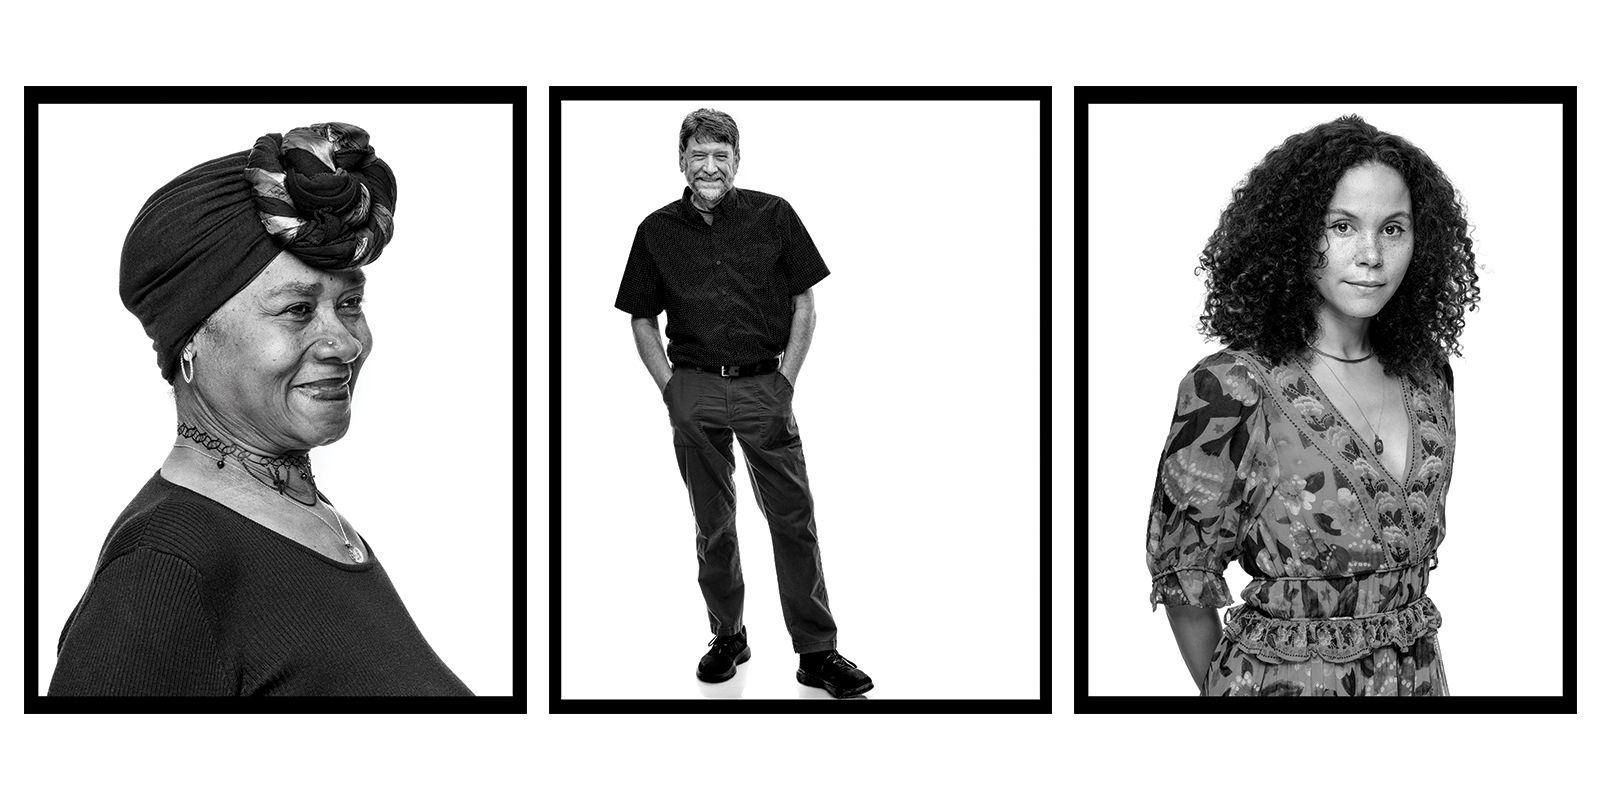 COMMUNITY OF HEALING: PORTRAITS FROM THE WHOLE-PERSON SPECIALTY CARE MOVEMENT